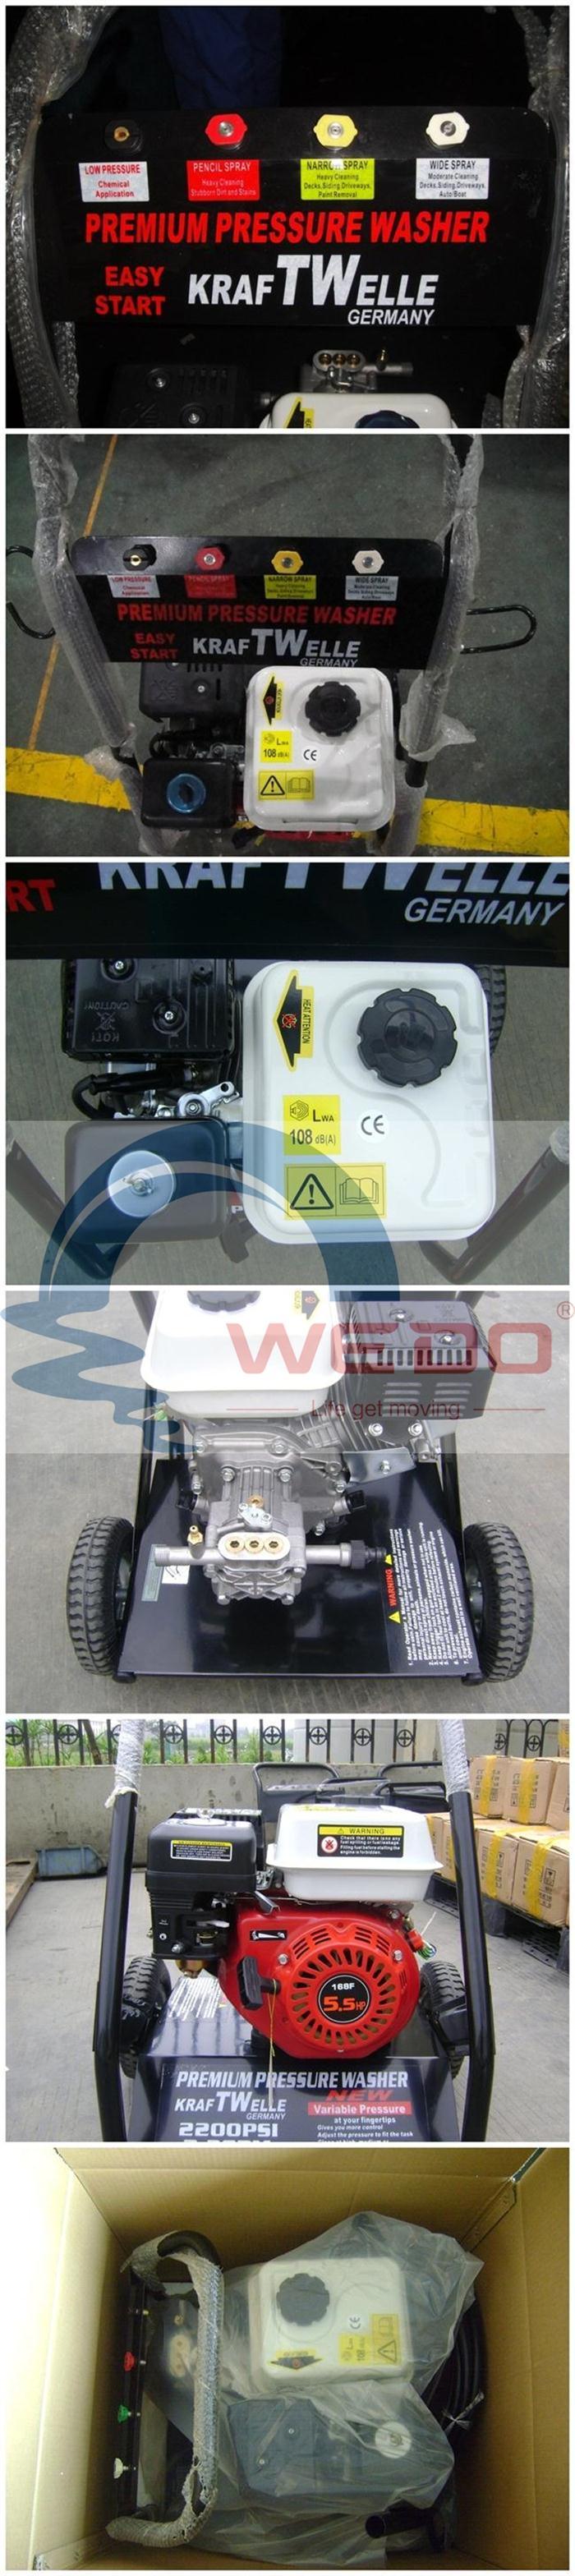 Wdpw3200d Household and Industrial 11.0HP/13.0HP Diesel Engine High Pressure Washer/Cleaner